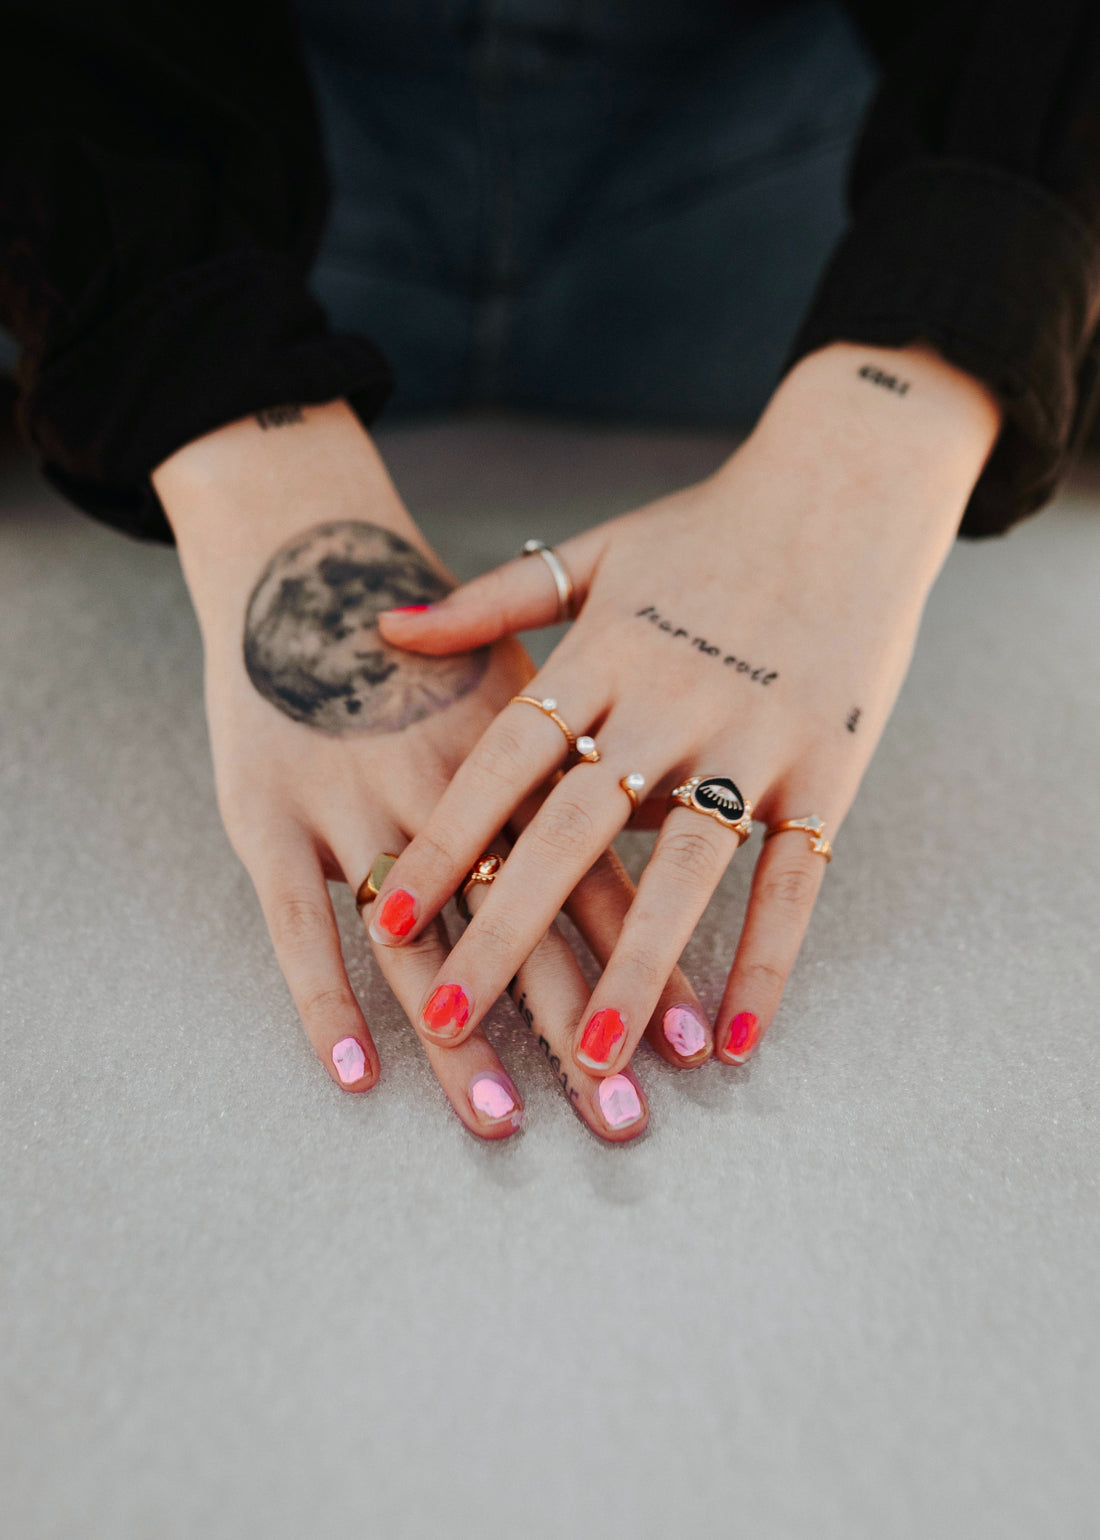 Hand Tattoos? What are the impacts?